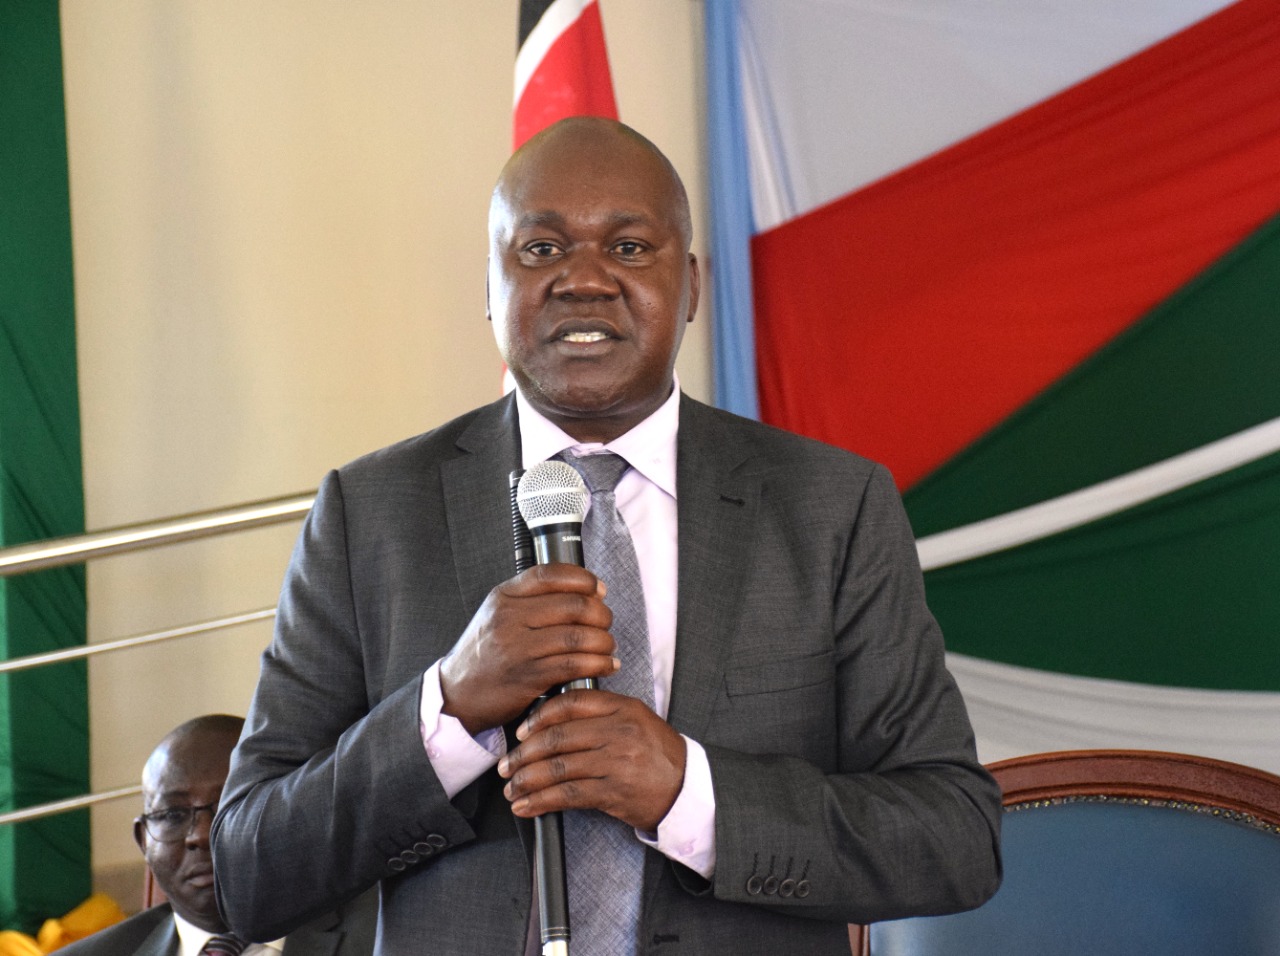 EACC Launches Corruption Prevention Audits at Bomet County Government